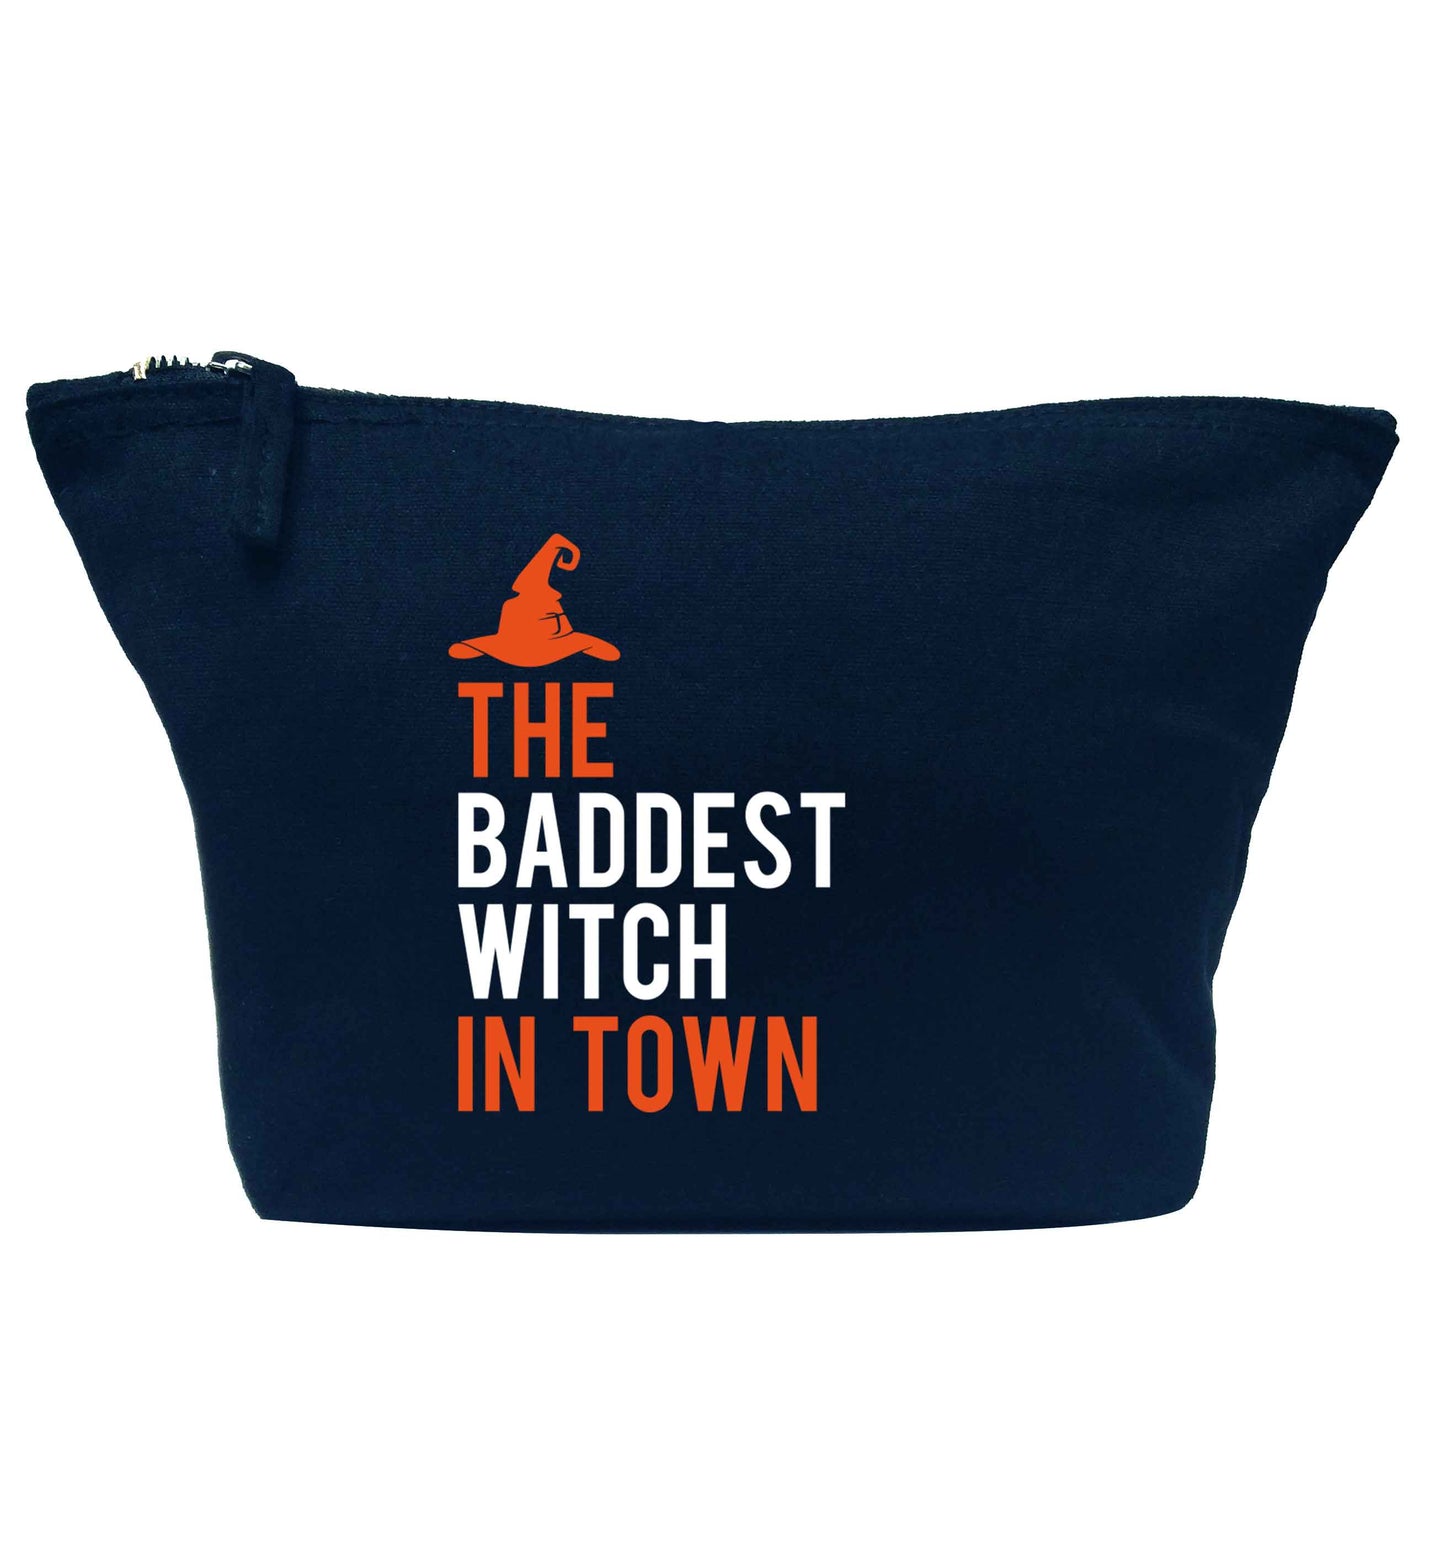 Badest witch in town navy makeup bag